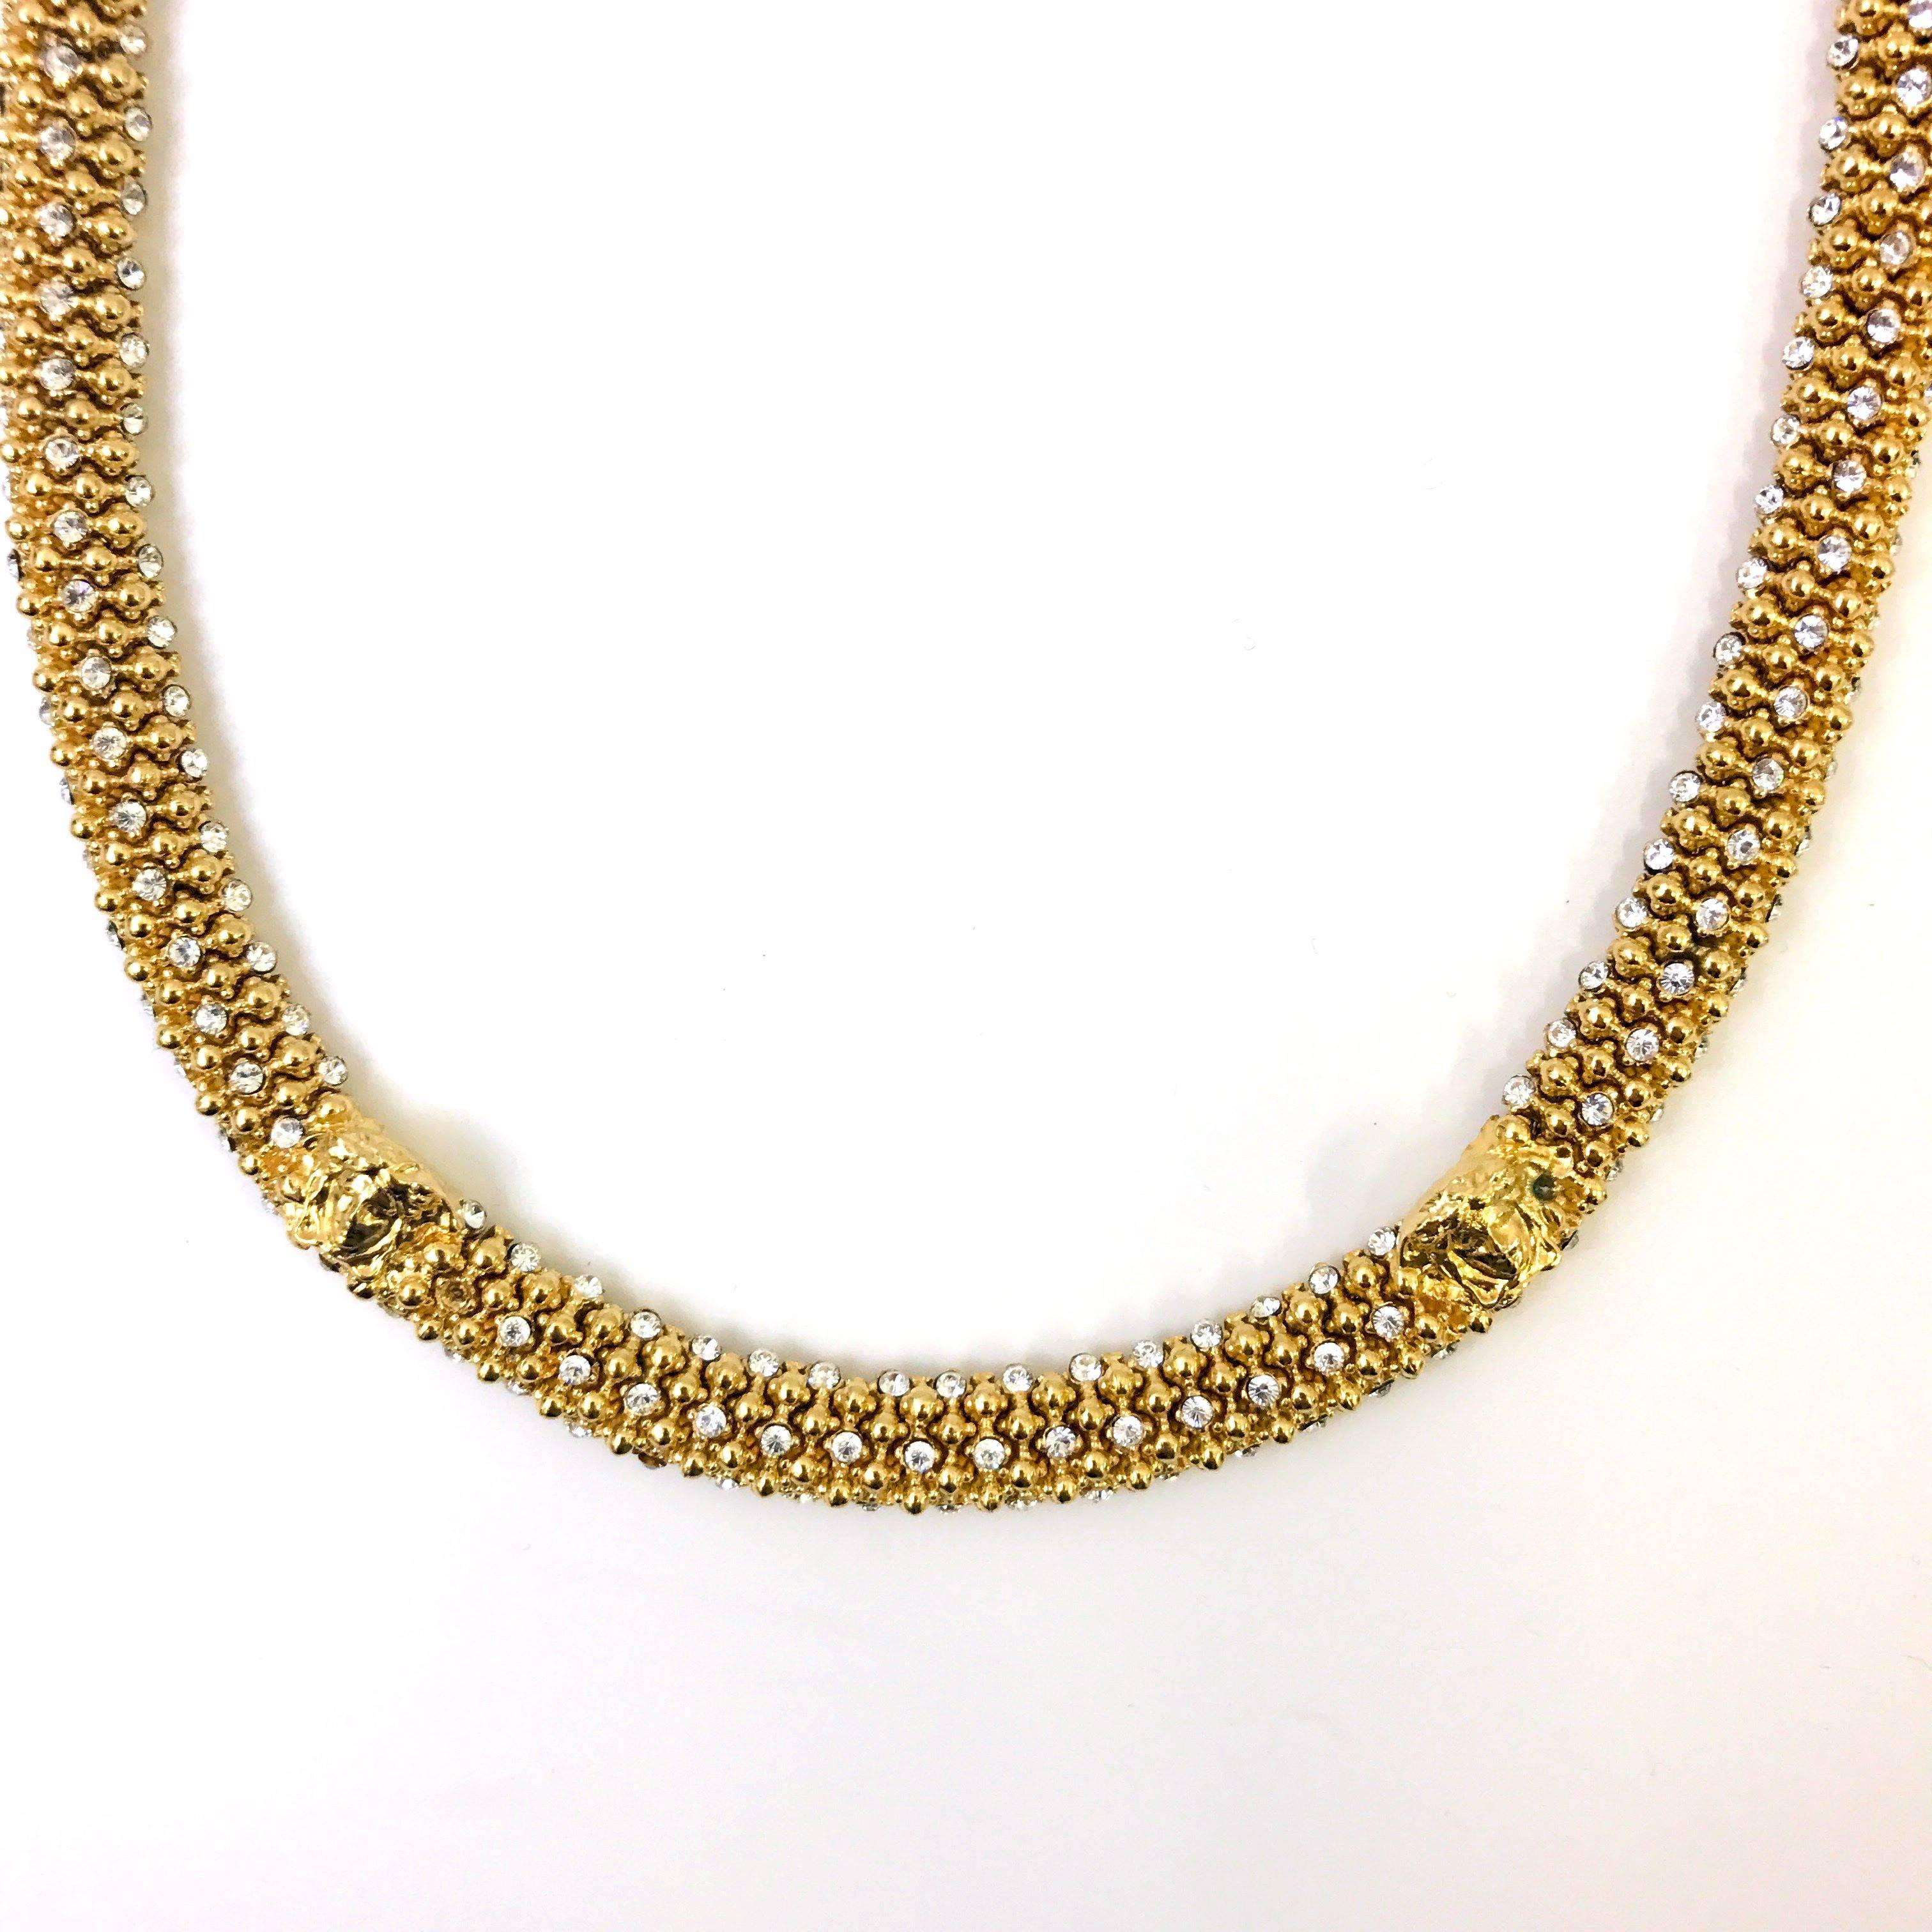 This Gianni Versace necklace has a matinee style which falls perfectly on your chest making it a statement piece on any outfit. The necklace features a omega ball style chain with diamantes placed throughout the piece which sparkles under any light.